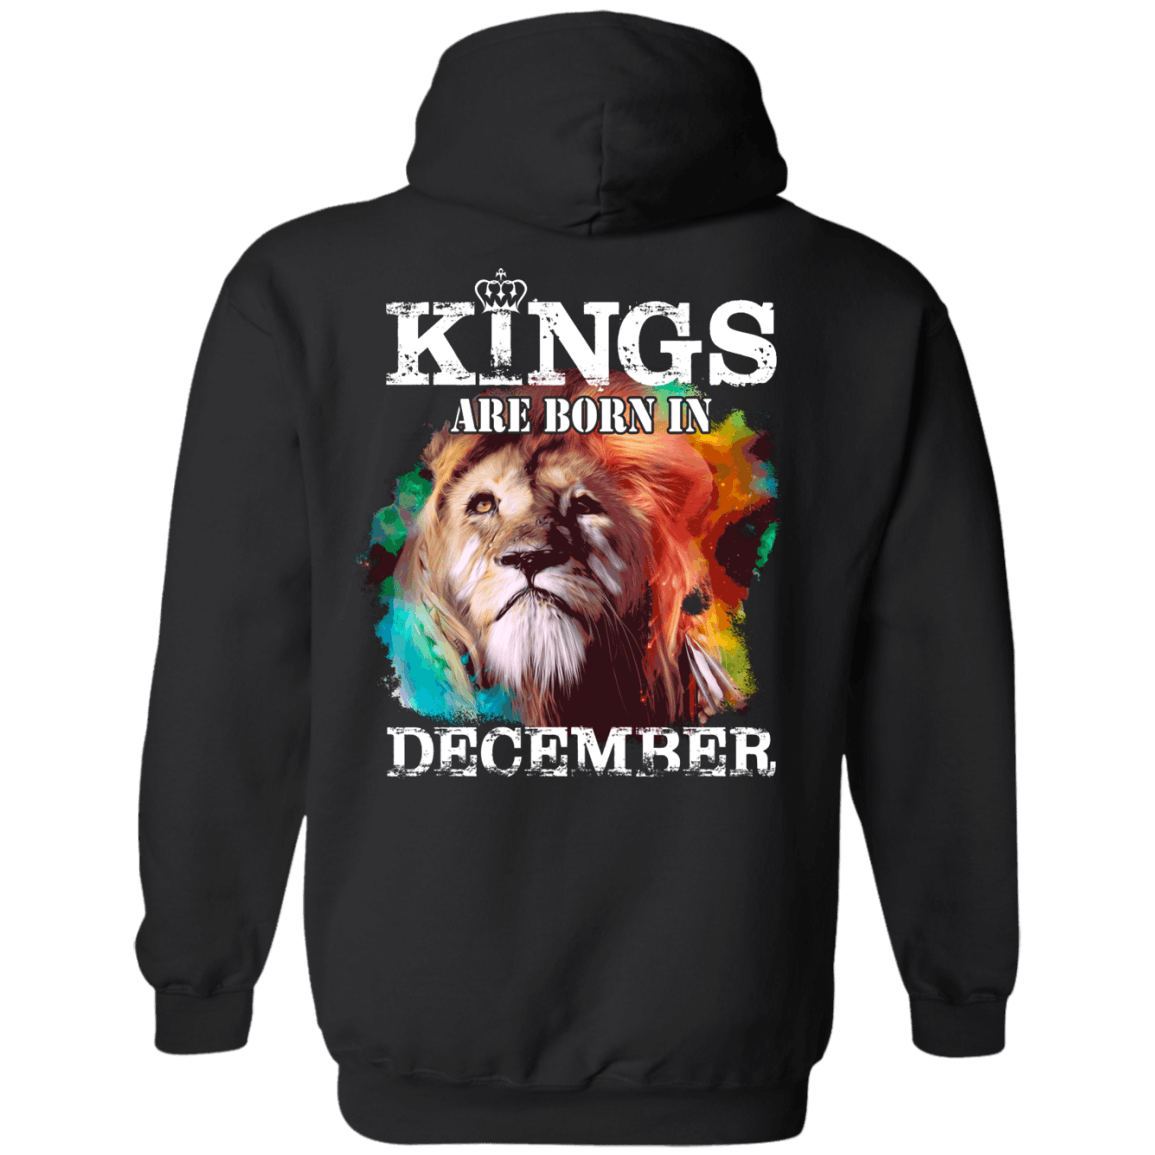 Born a Lion Clothing Logo - Limited Edition December Born Lion King Shirts & Hoodies - Elements ...